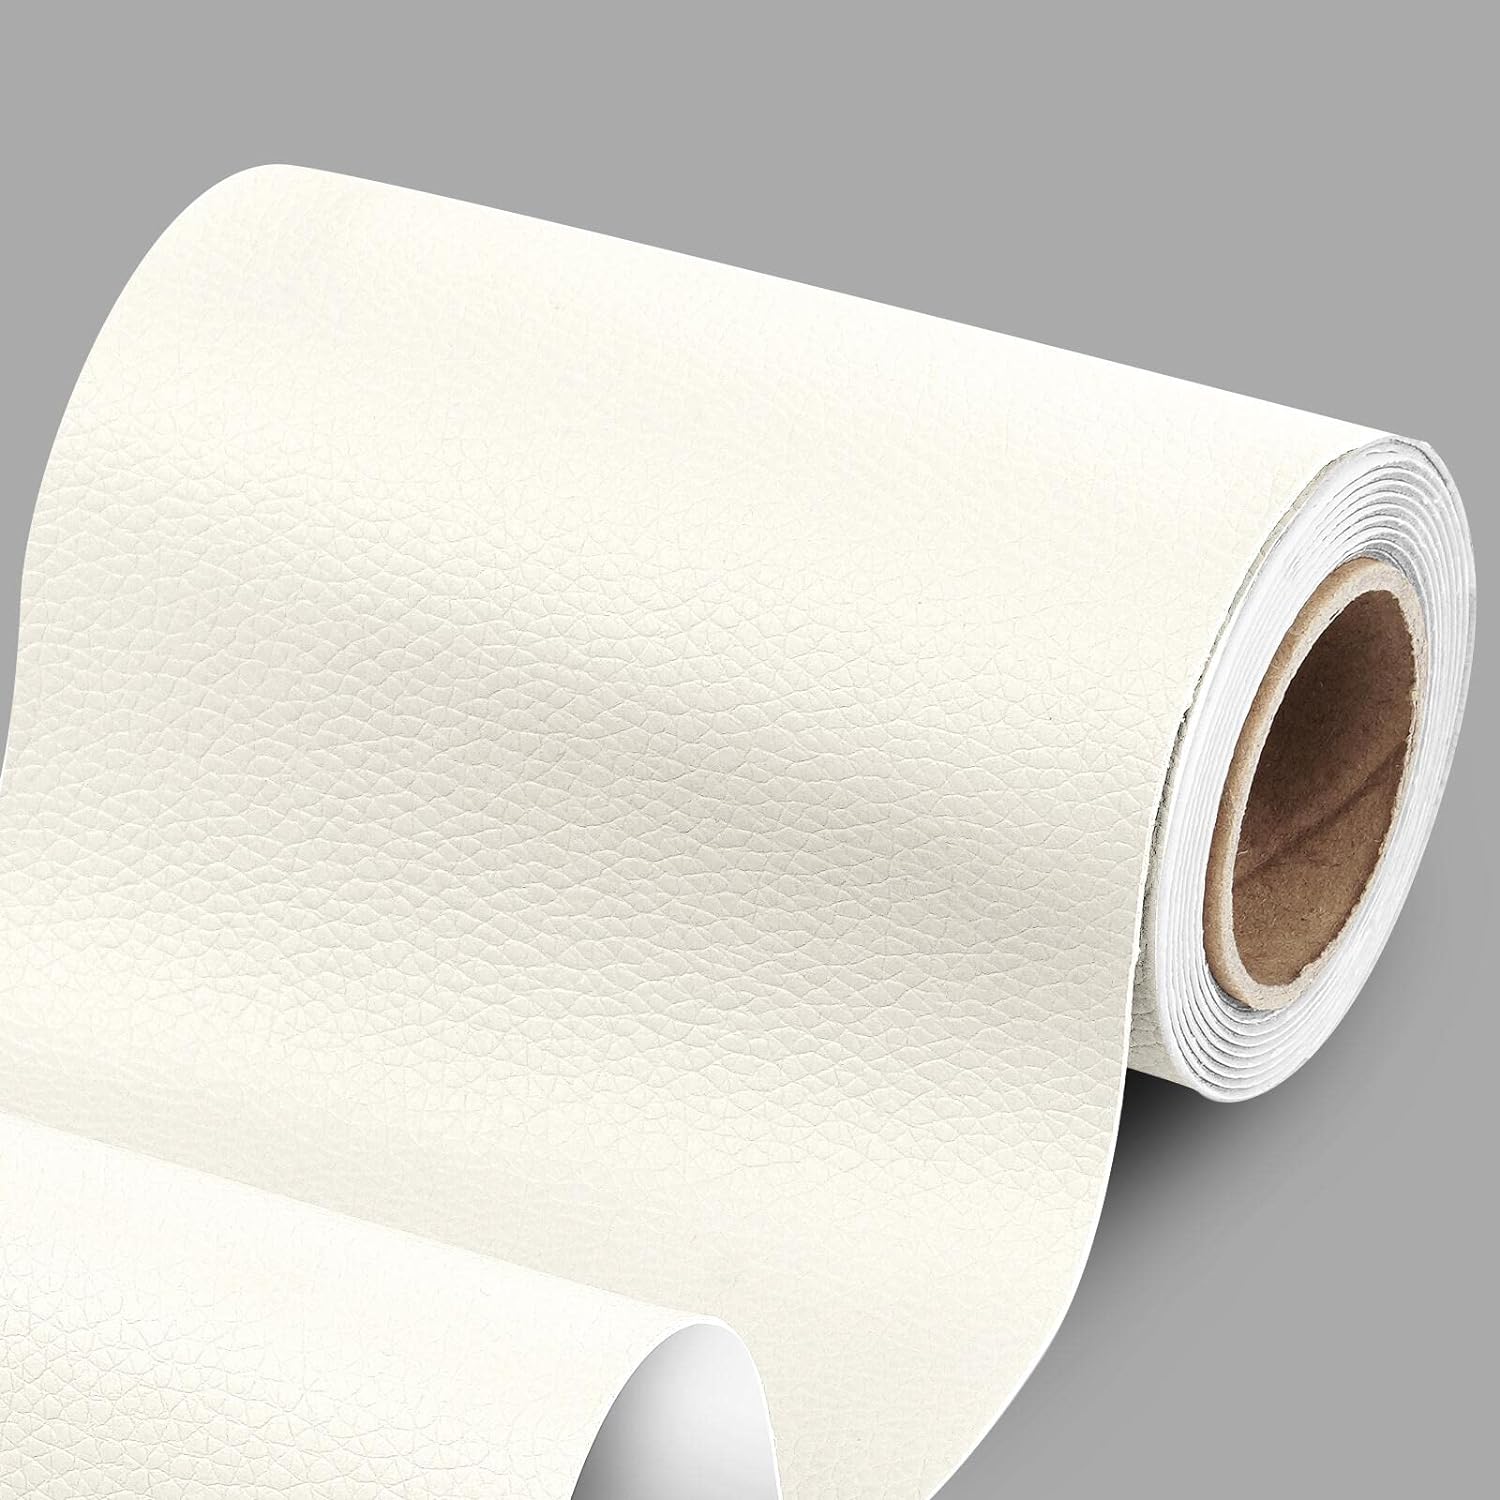 Stickyart Leather Tape Faux Leather Repair Patch for Furniture Matte Leather Upholstery Patches for Couches Fabric Self Adhesive Leather Sticker for Sofa Bags Car Seat Off White 3.94x78.7